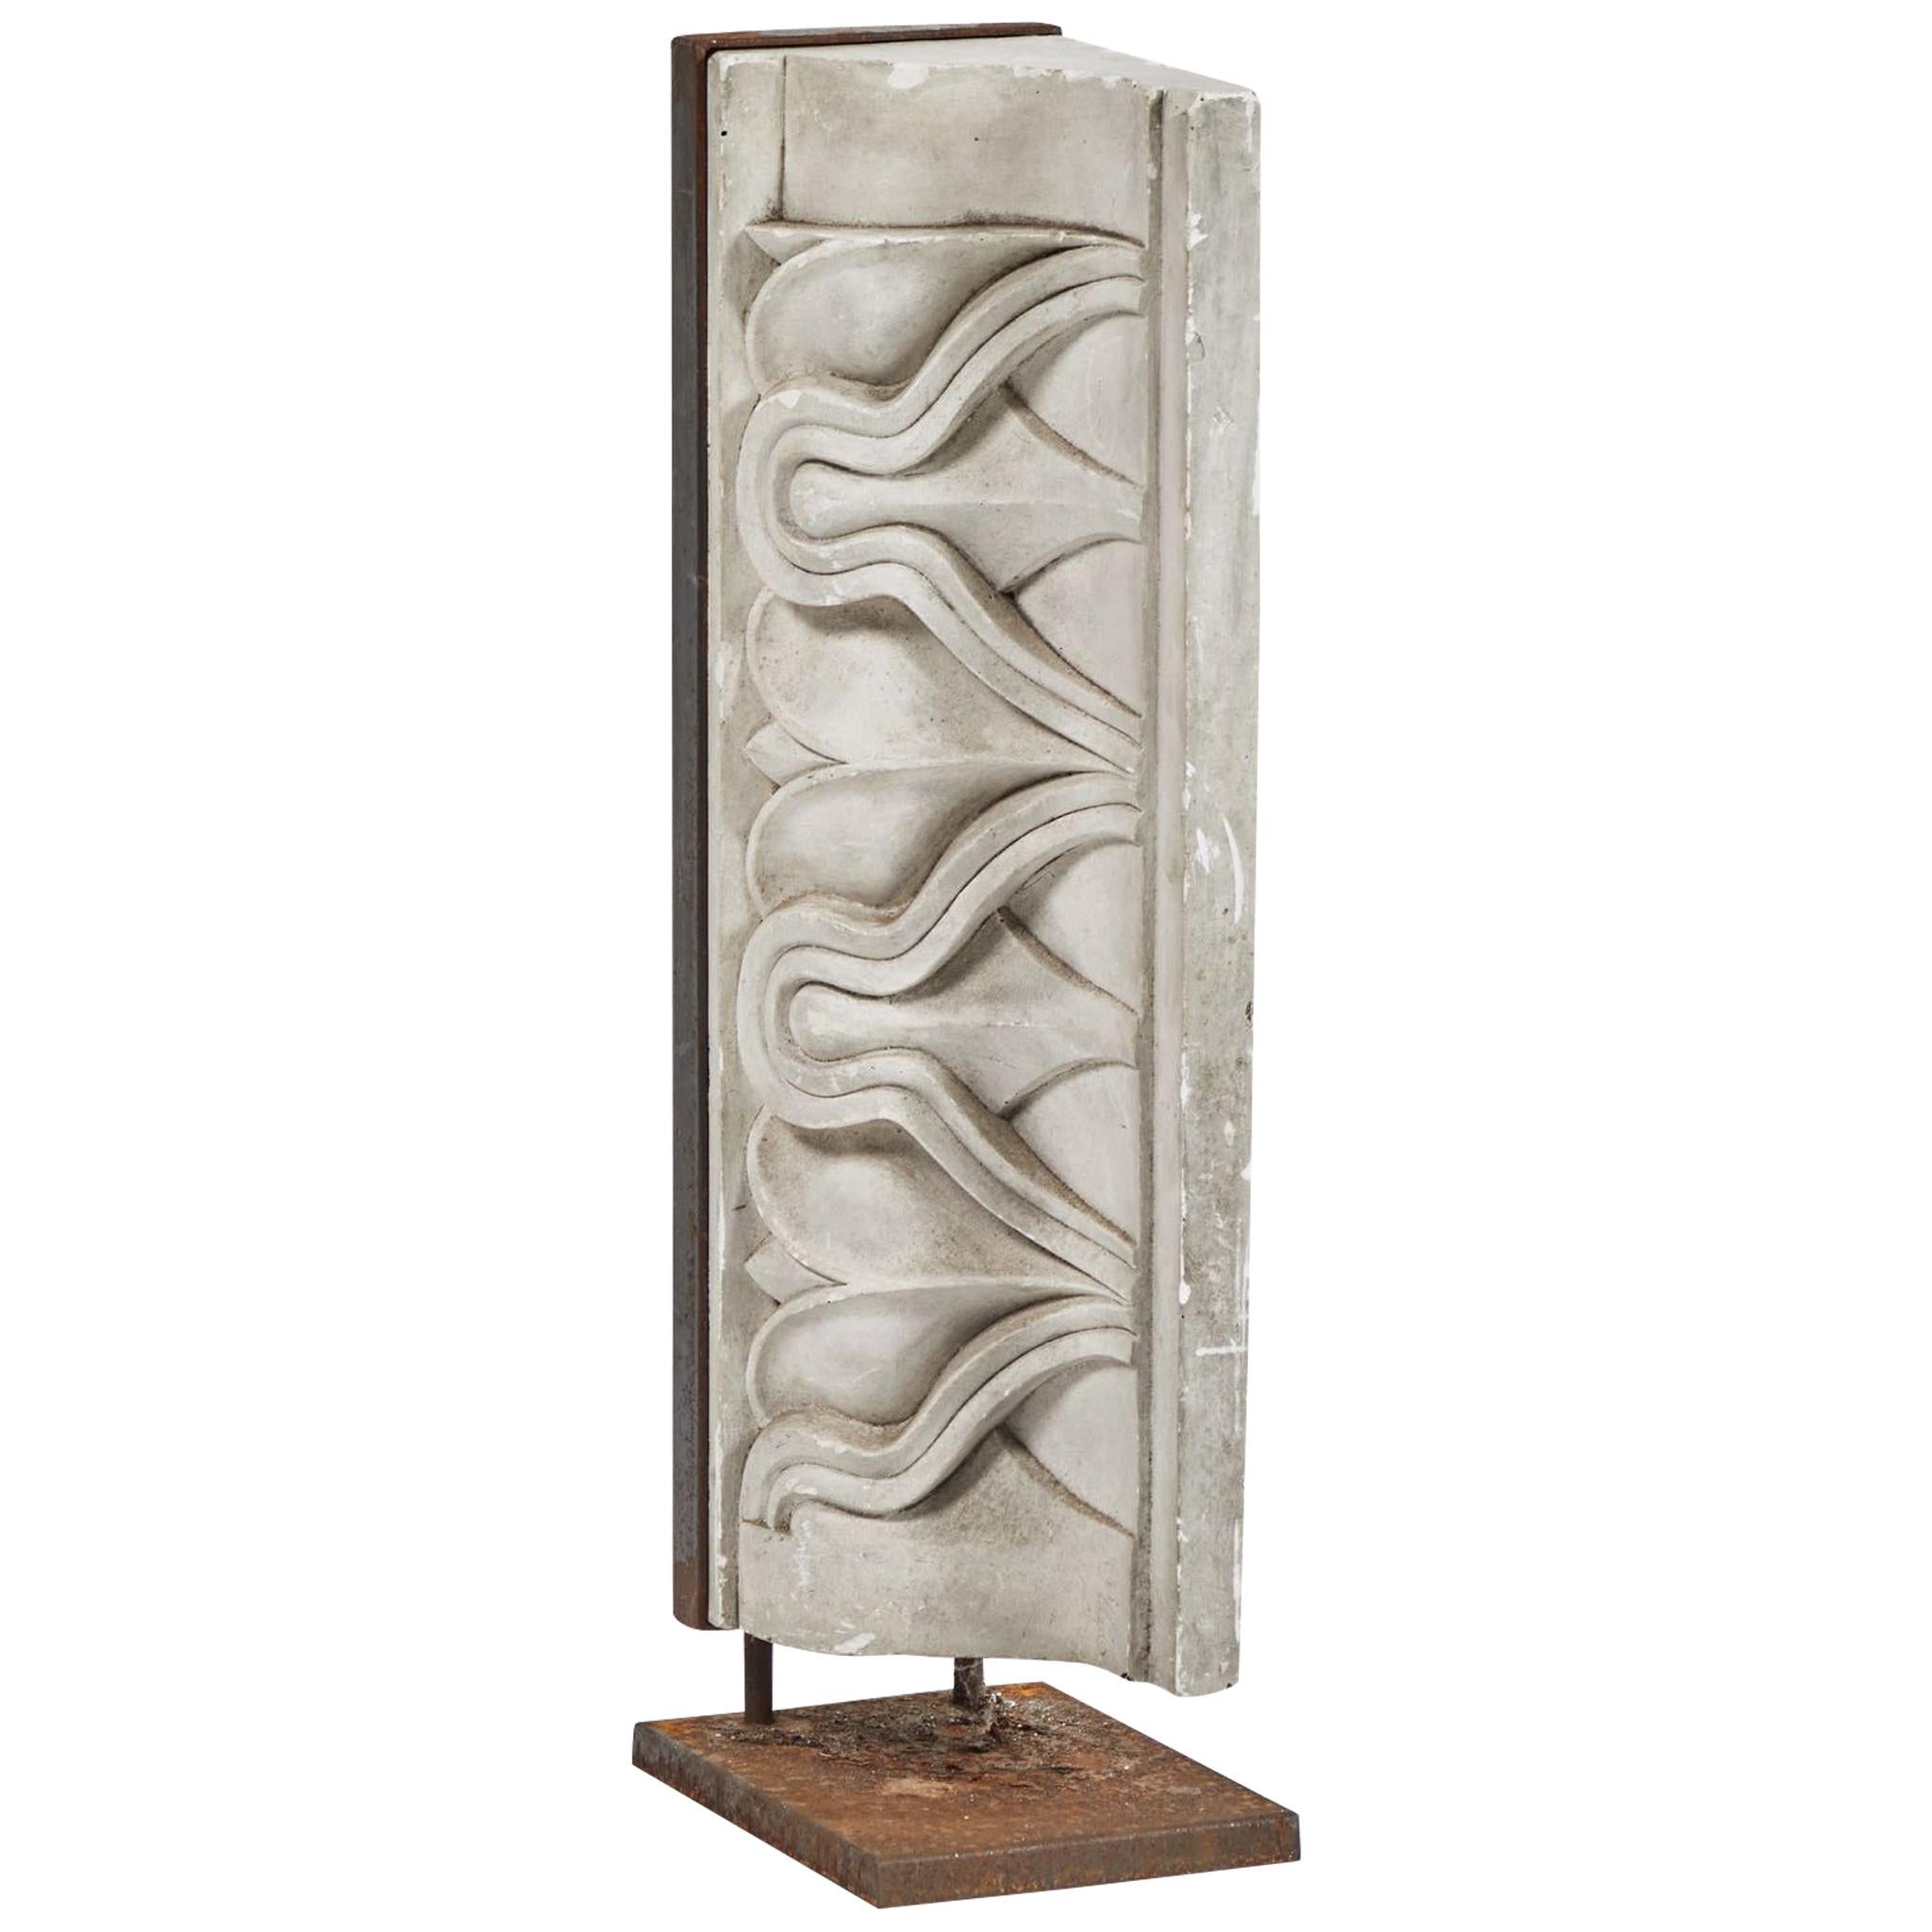 Carved Plaster Architectural Relief Mounted on Iron Stand